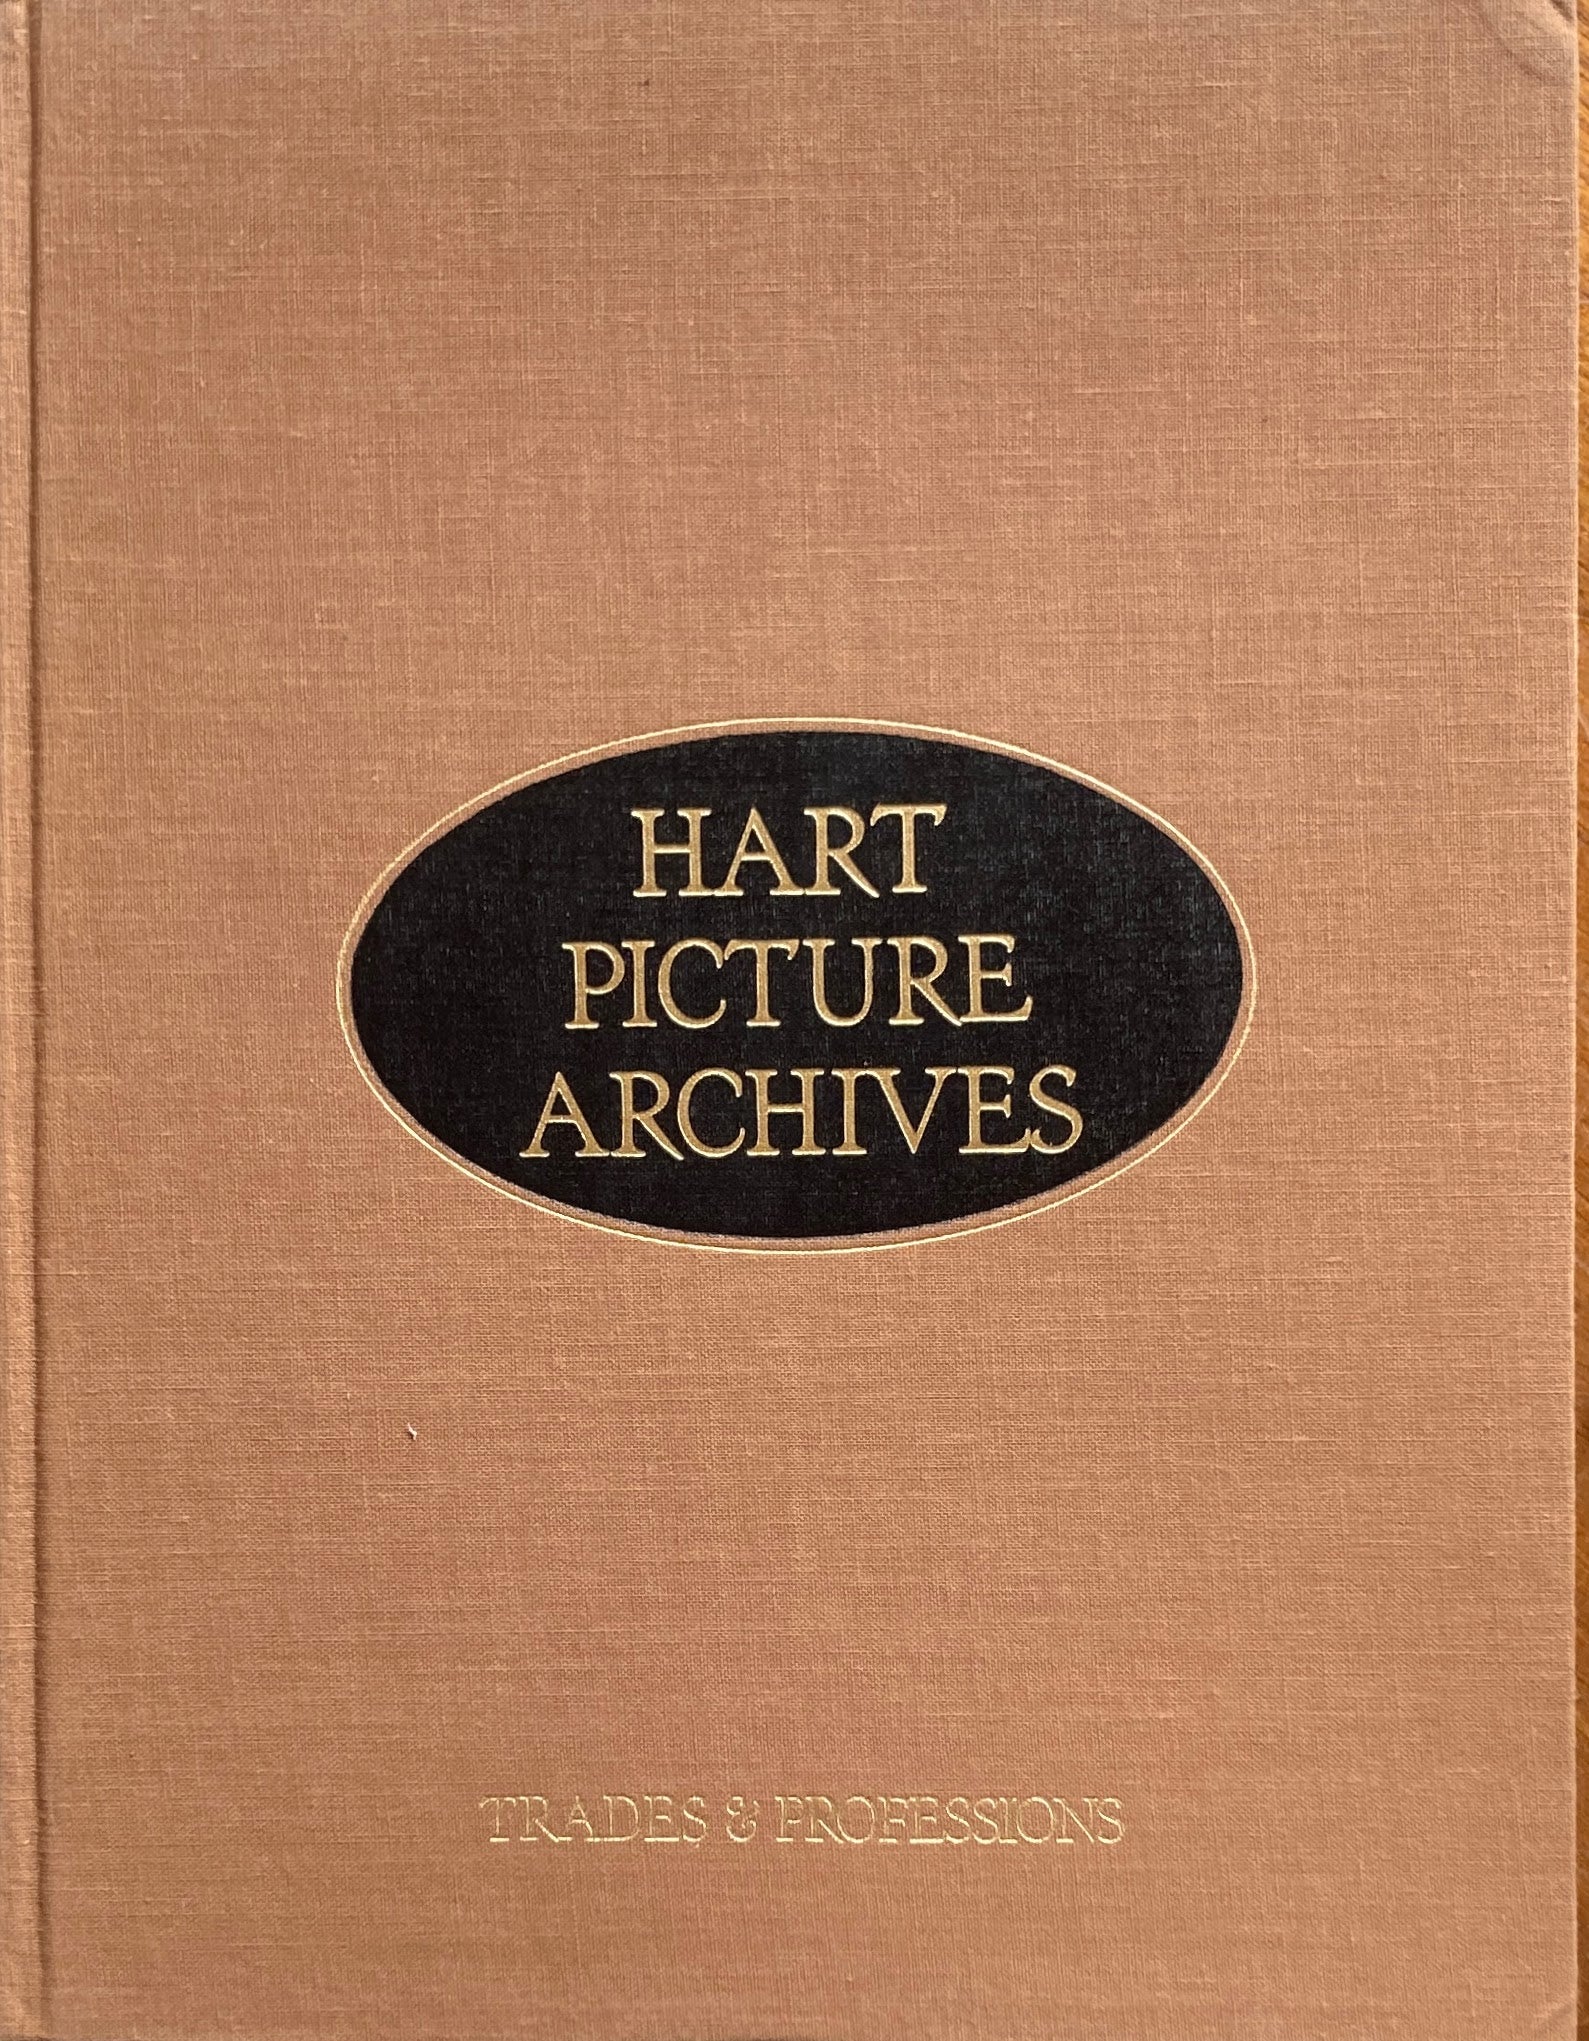 Hart picture archives　Trades & professions